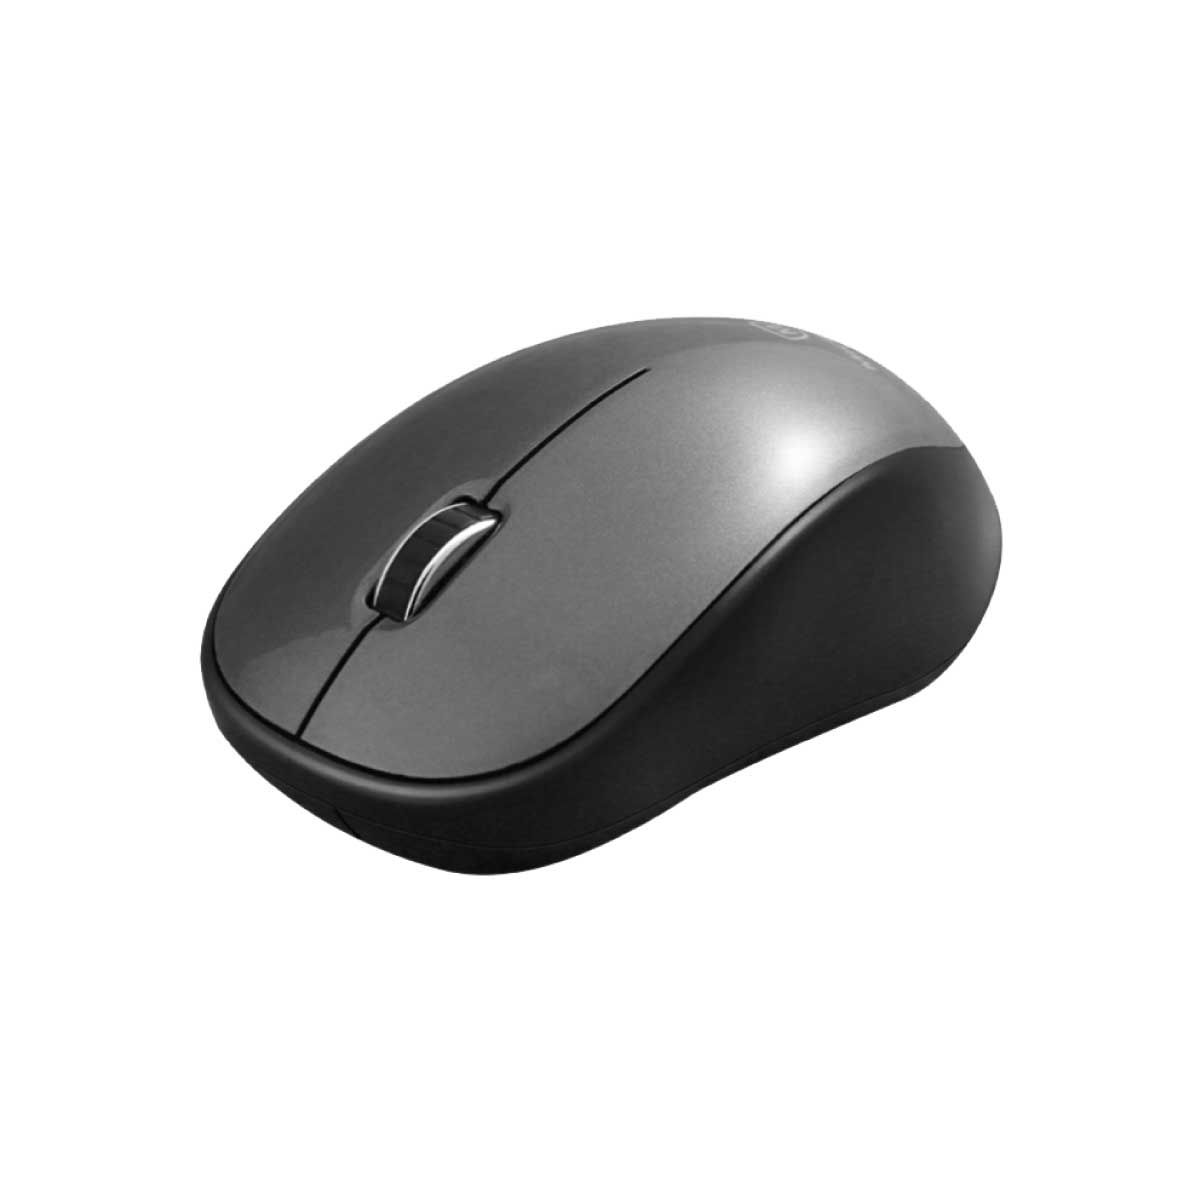 MOUSE (เมาส์ไร้สาย) MICROPACK MP-771W ST WIRELESS SILENT MOUSE (GRAY)